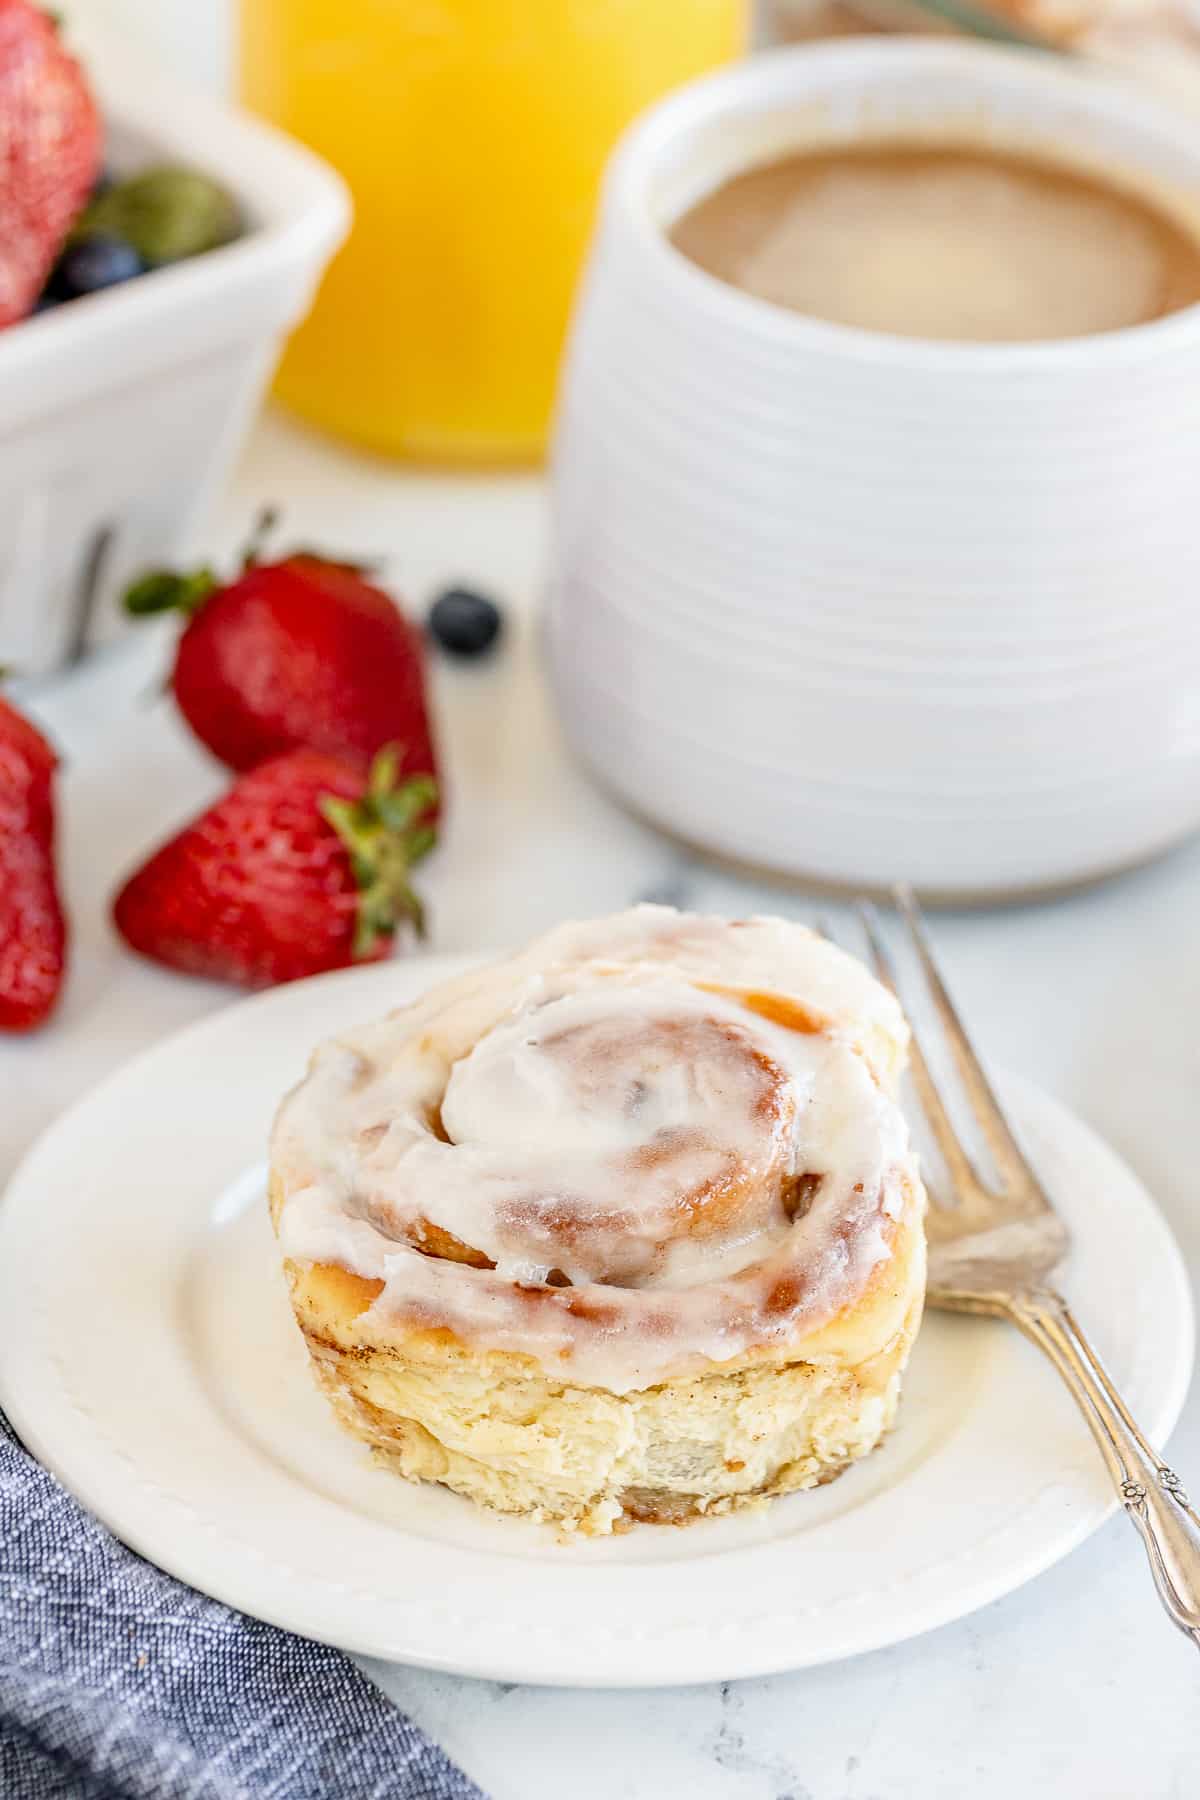 A cinnamon roll on a plate next to a cup of coffee and strawberries.